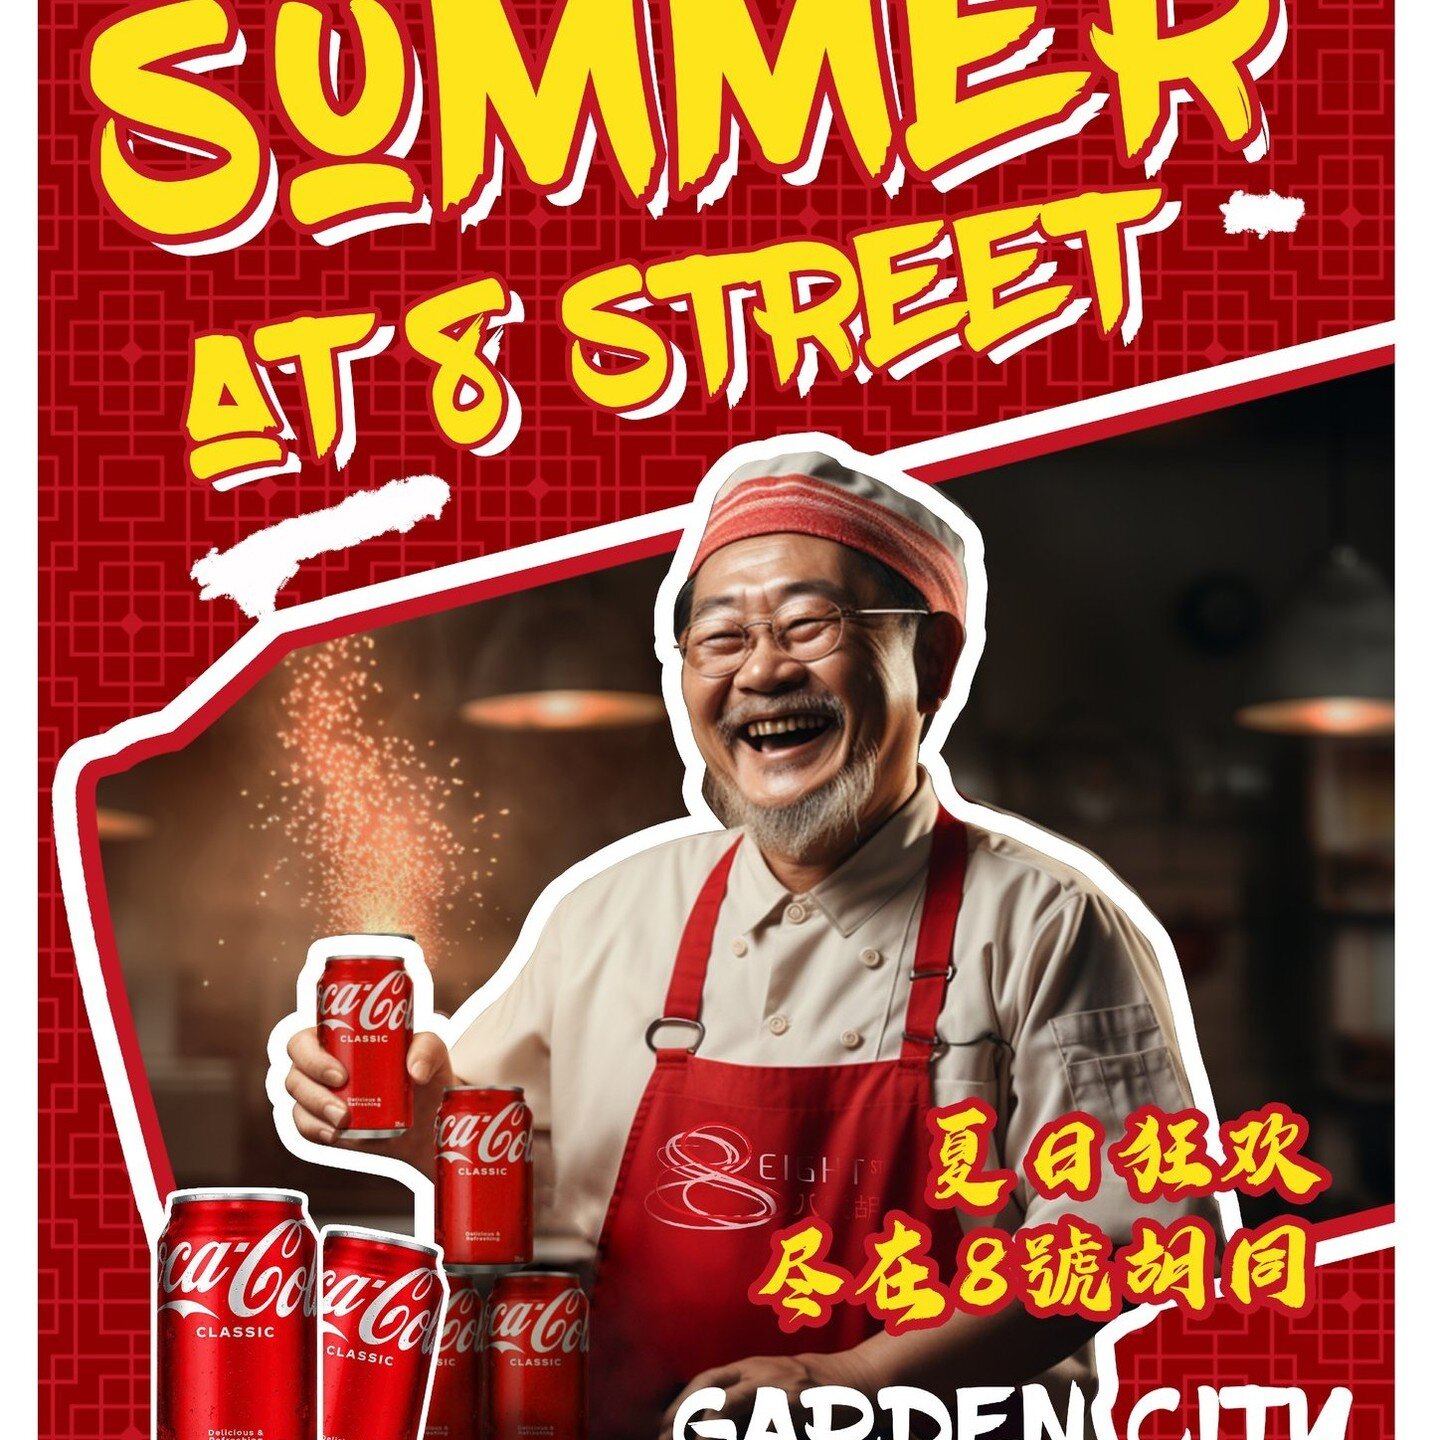 Extend your summer at 8 Street.
Sip happiness for just $2 dollars at 8 street Garden City Bar! Scan the QR code to order your favourite Coke or Coke Zero along with delicious food. 
Available from 8th March 2024 to 28th April 2024. 
Don't miss out on